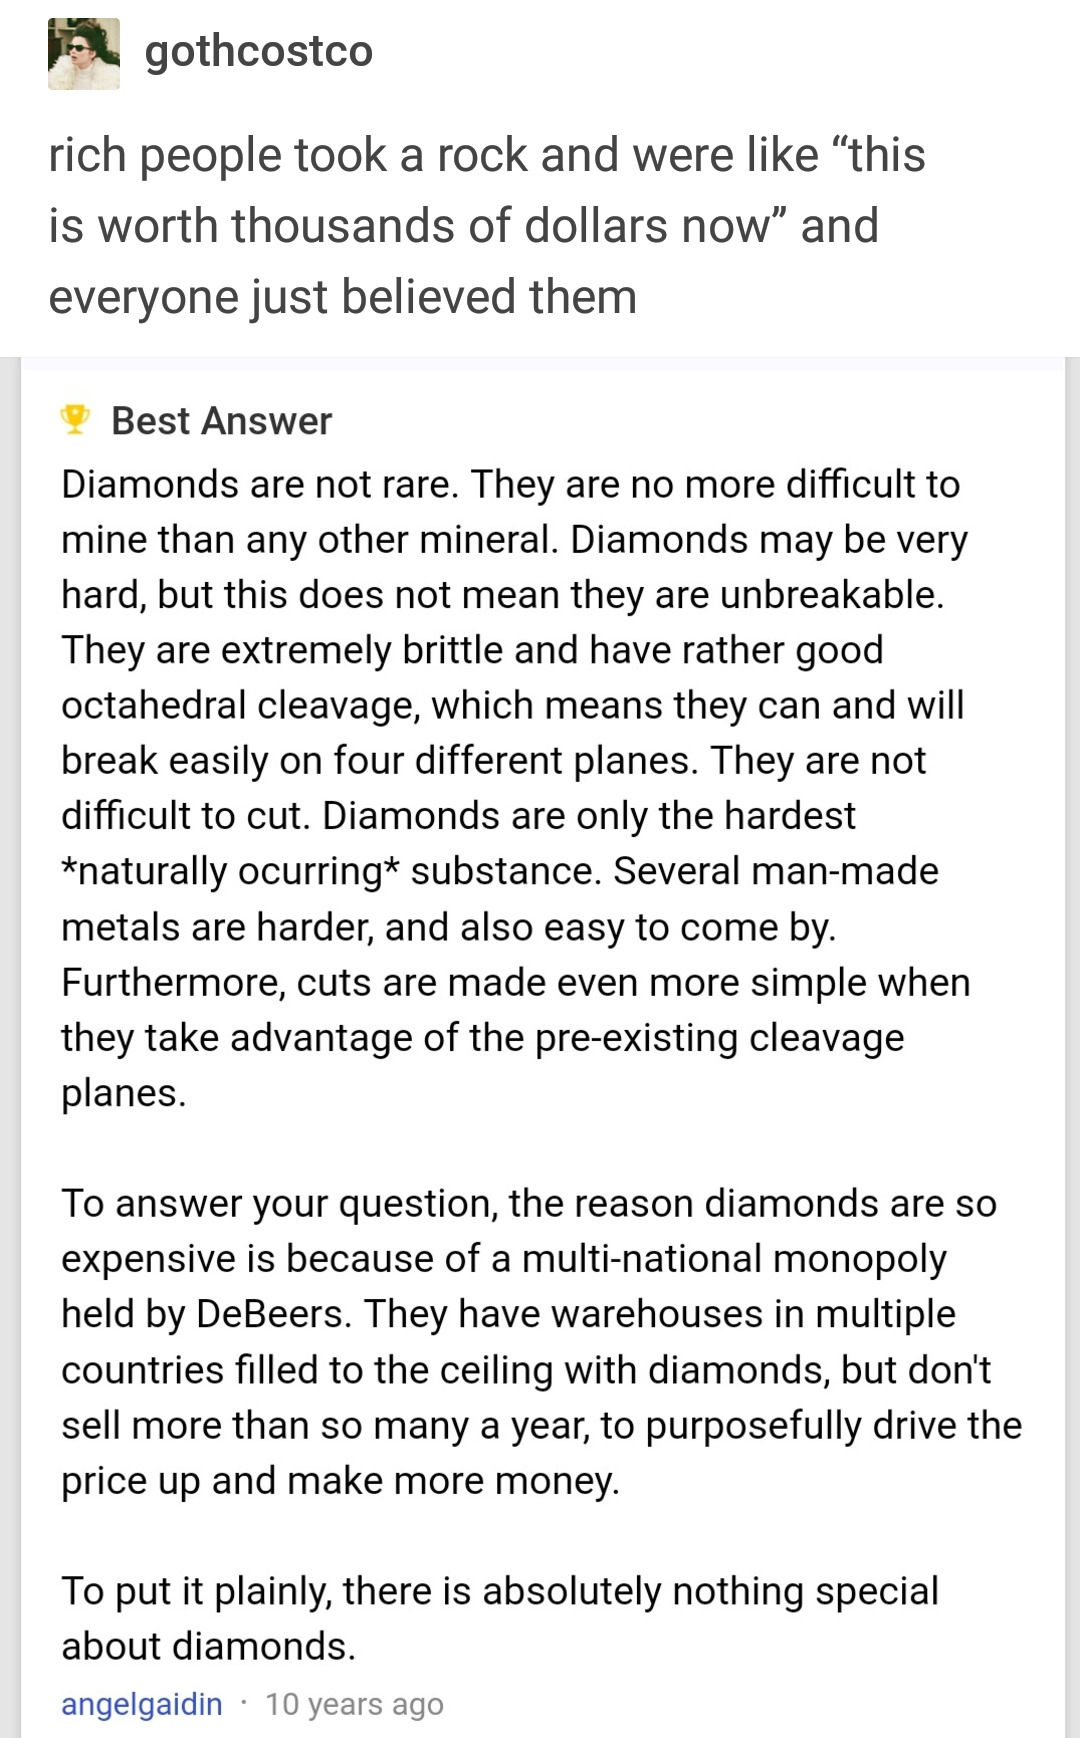 there is absolutely nothing special about diamonds